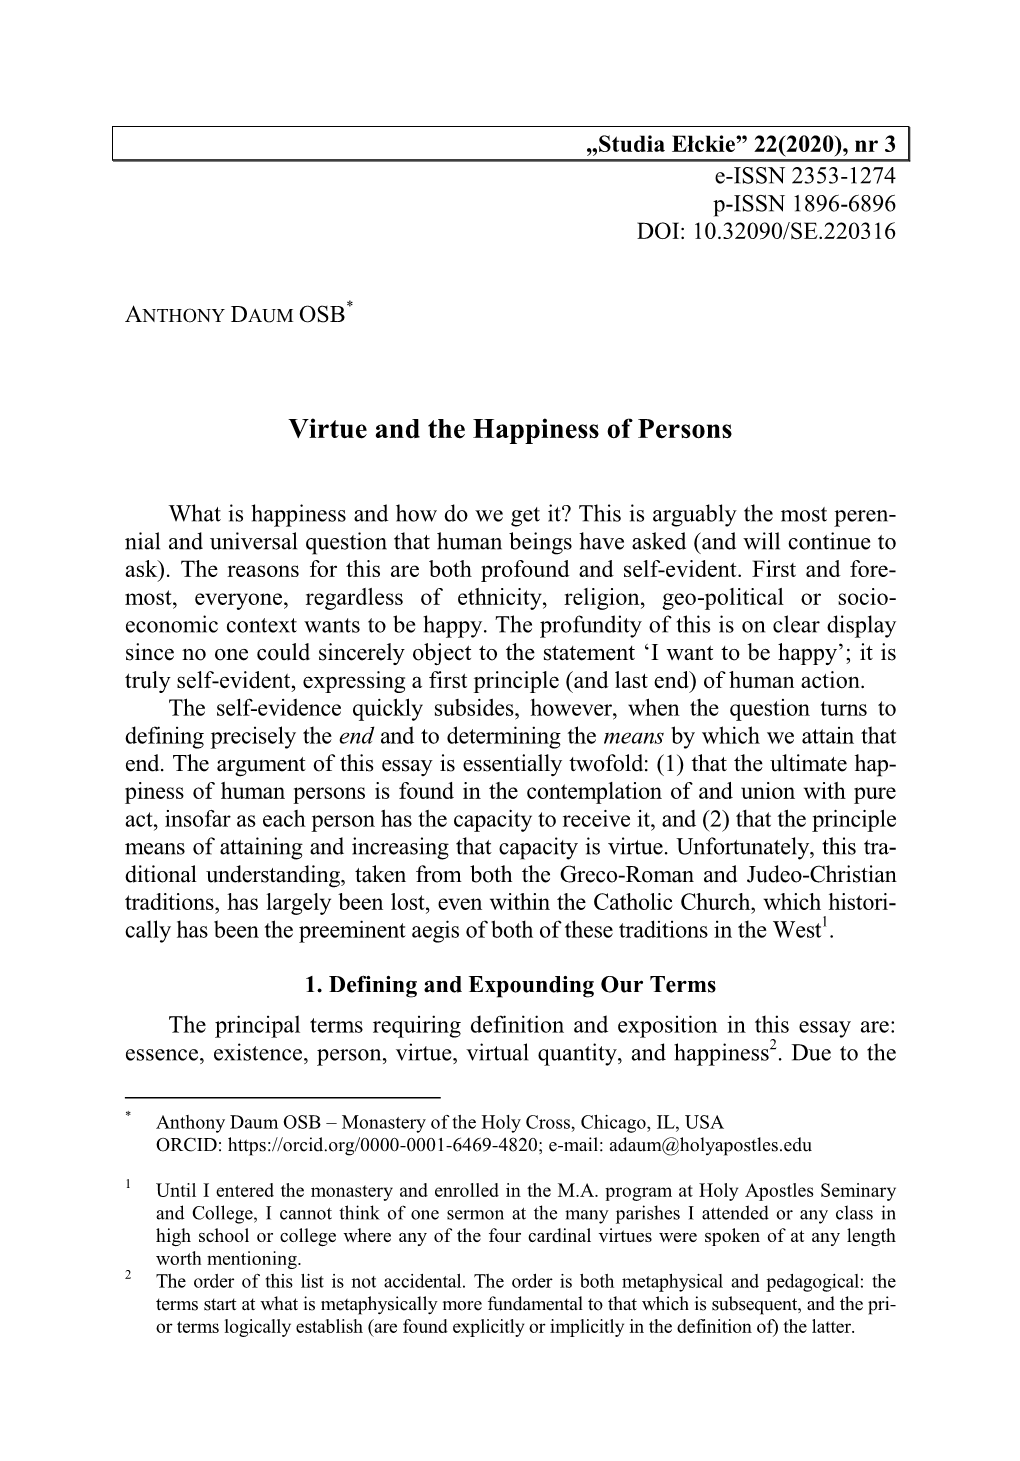 Virtue and the Happiness of Persons